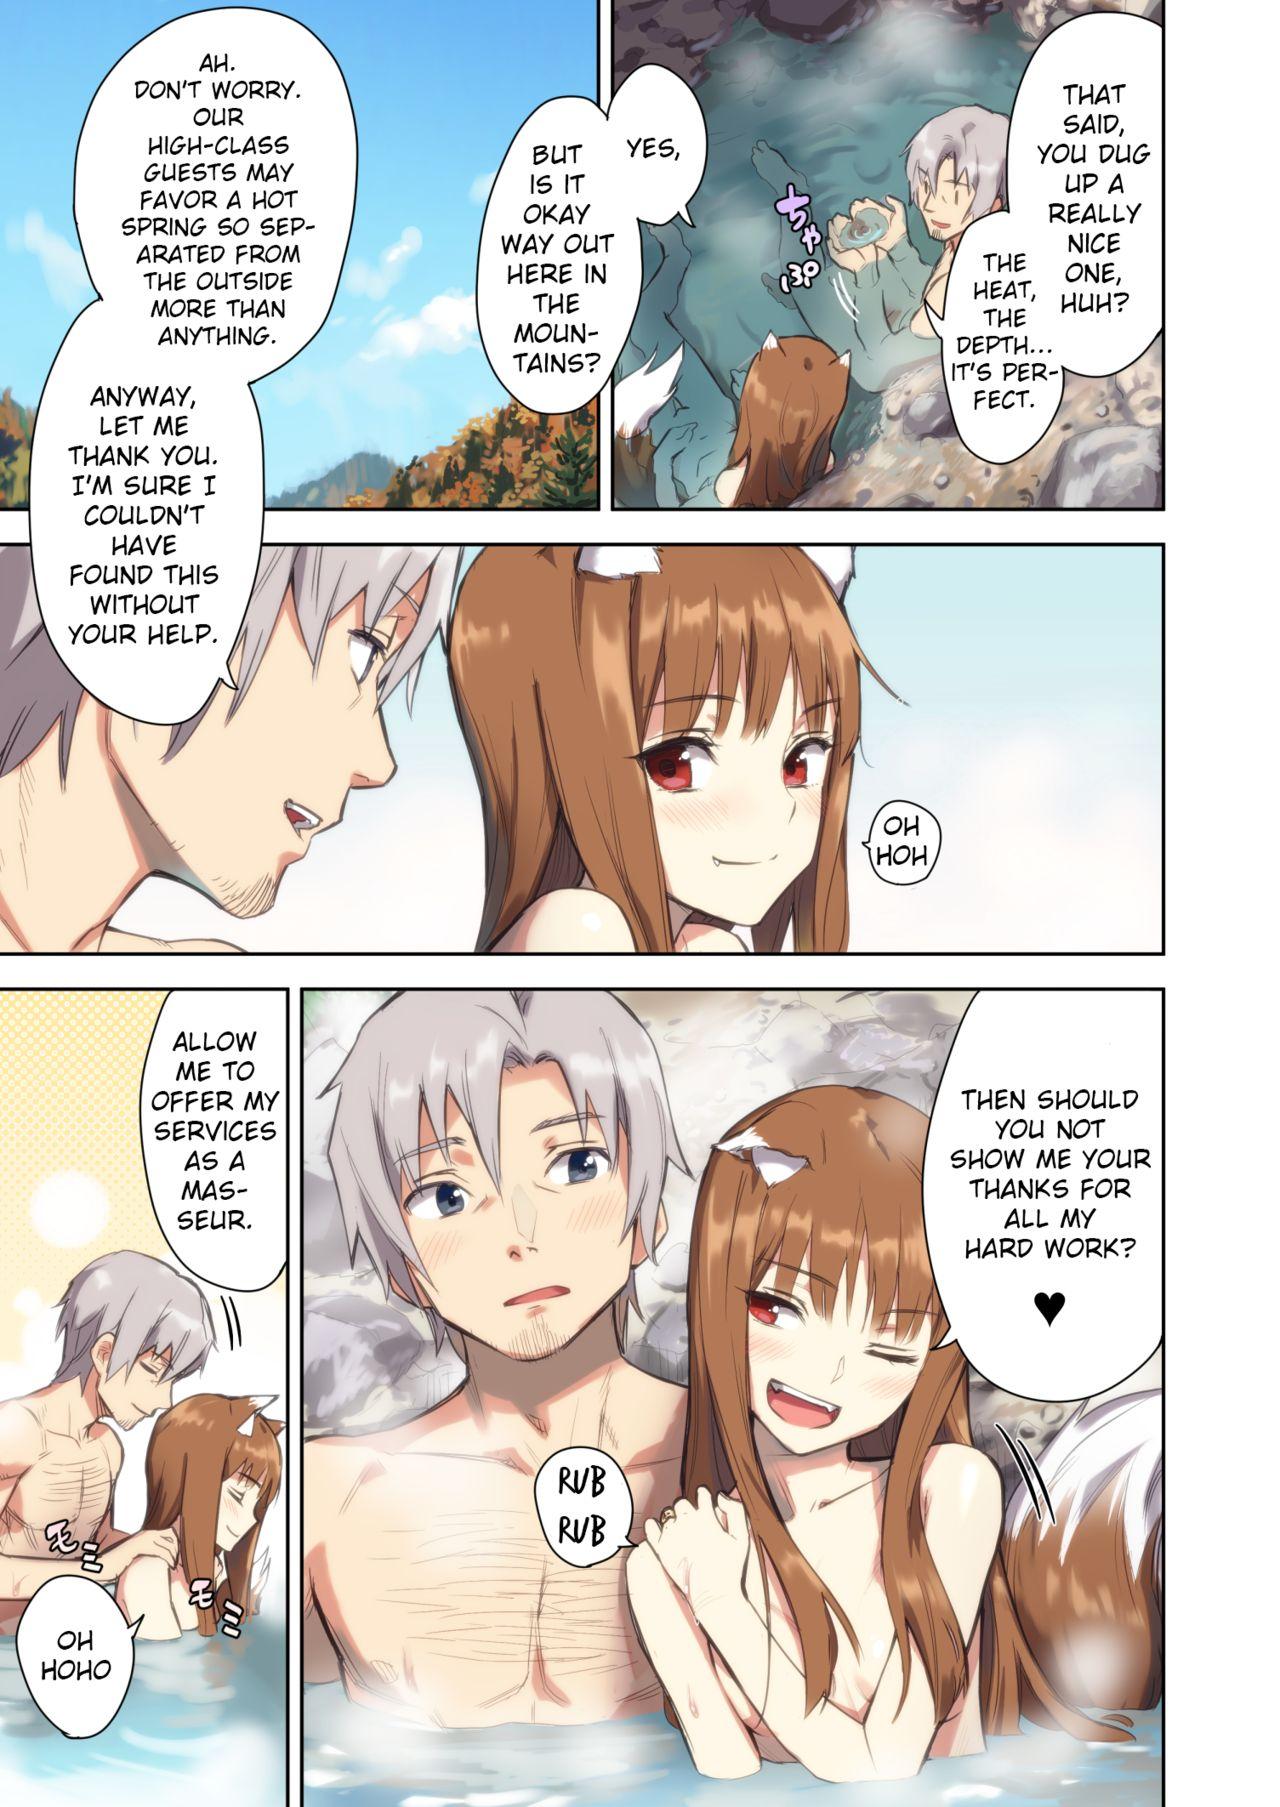 Dirty Talk Wacchi to Nyohhira Bon FULL COLOR DL Omake - Spice and wolf | ookami to koushinryou Morena - Page 6